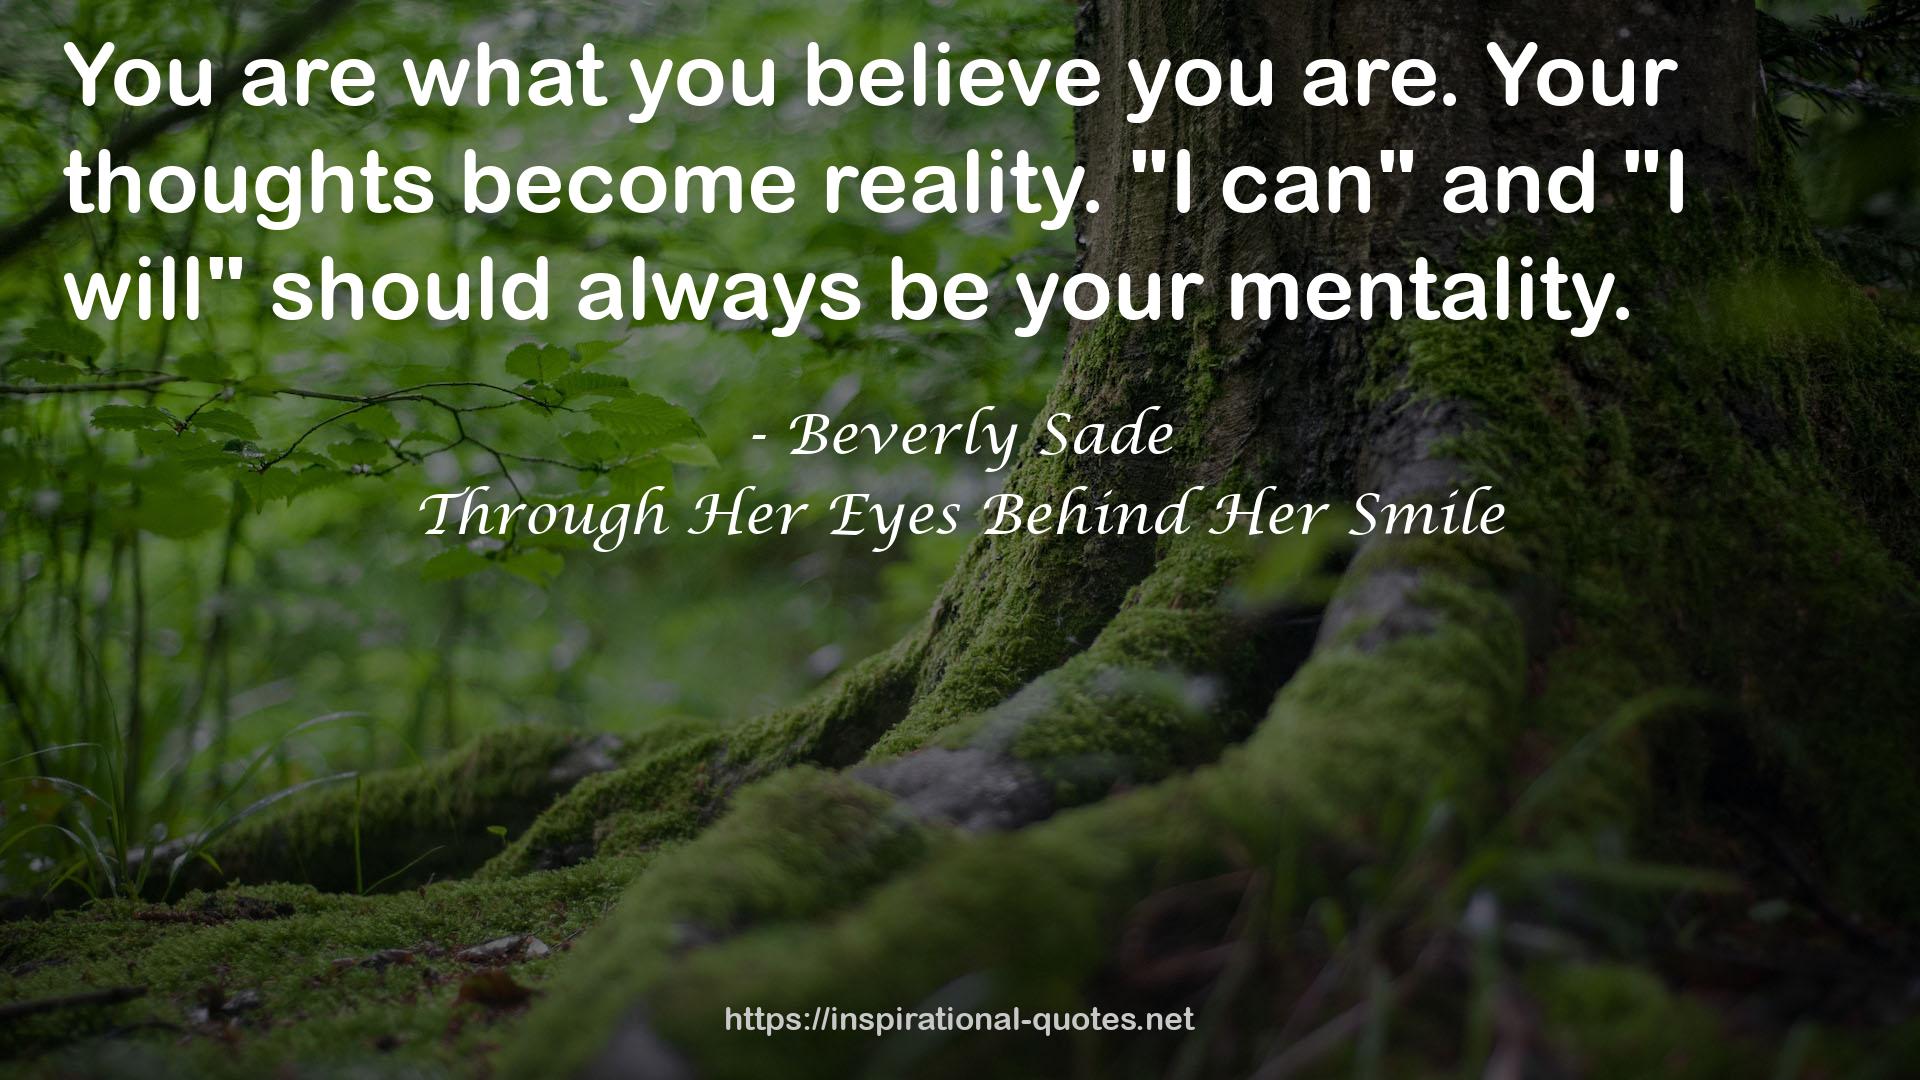 Beverly Sade QUOTES